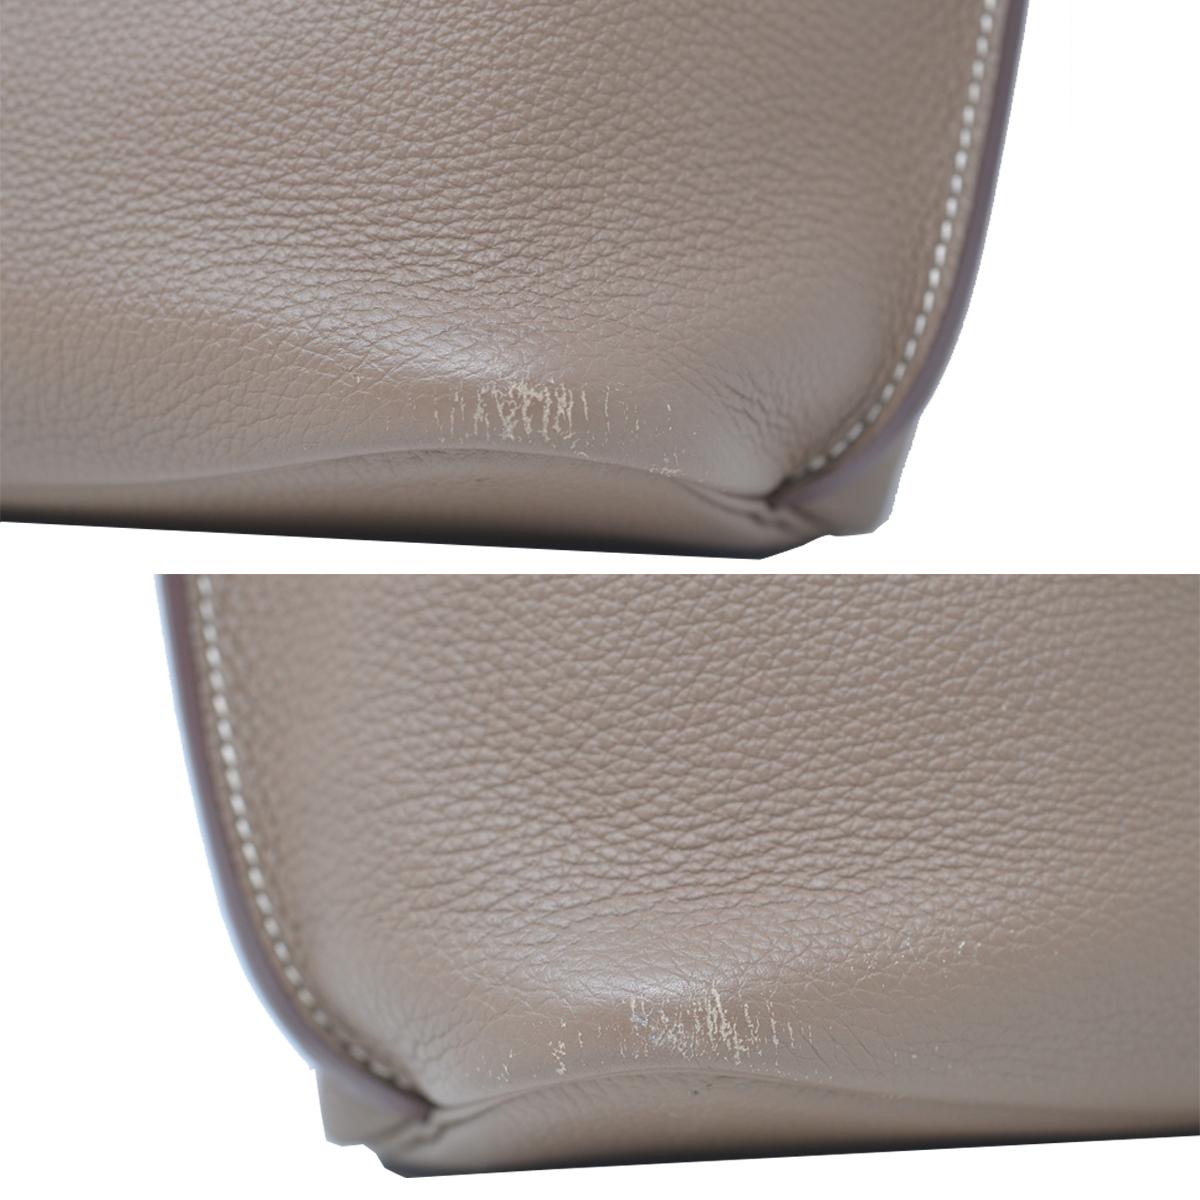 Hermes Clemence So Kelly 22 Toupe Leather Shoulder Bag In Good Condition In Boca Raton, FL